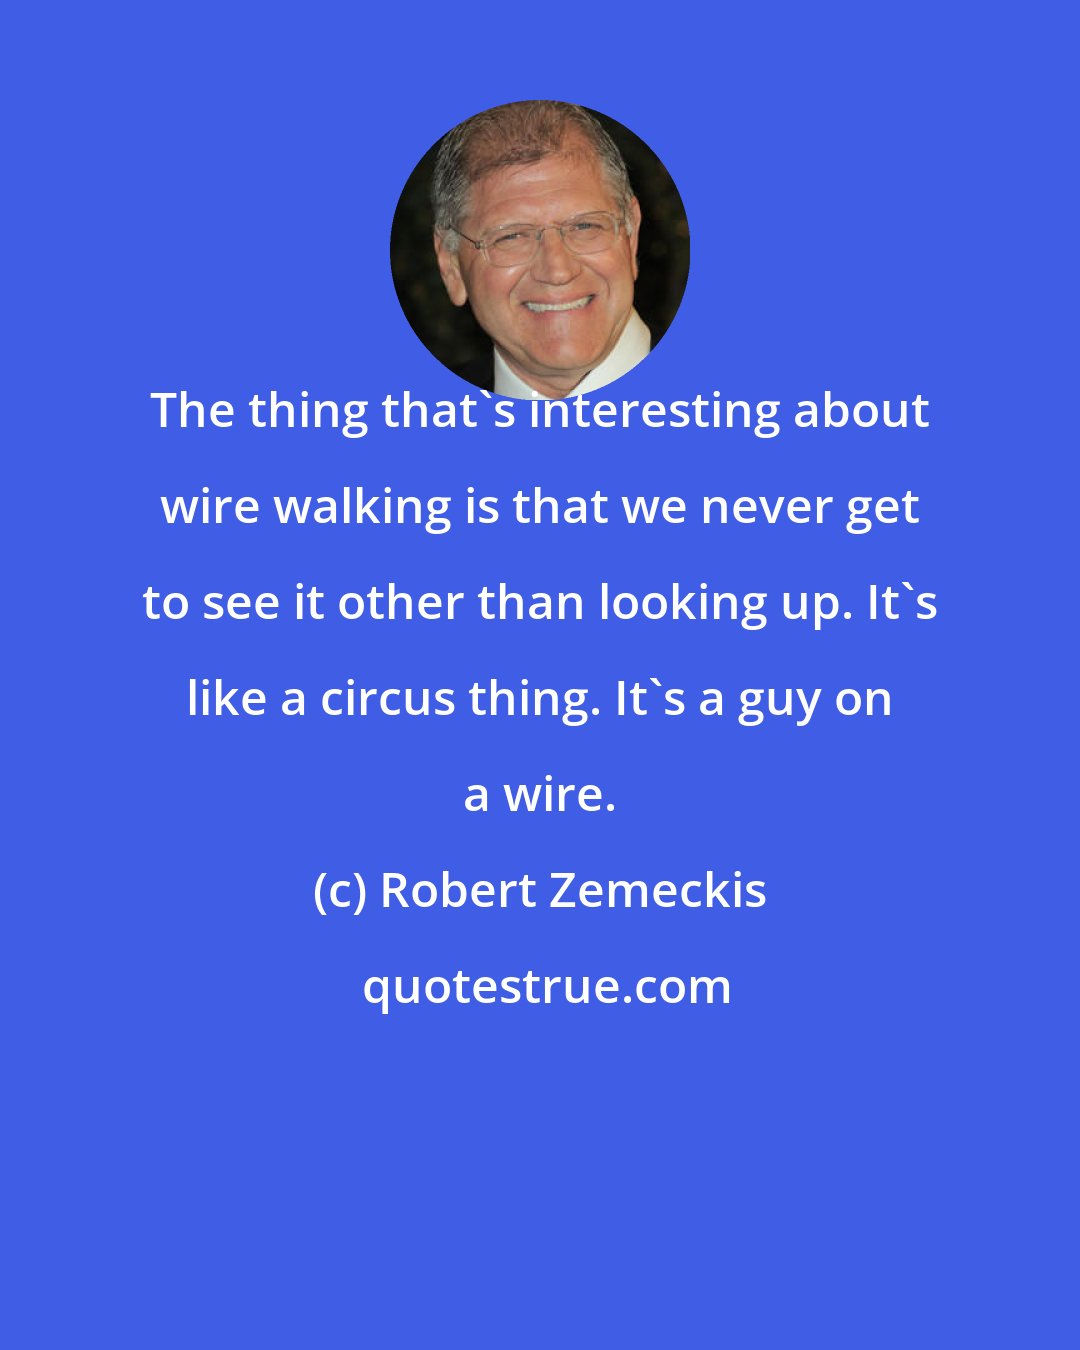 Robert Zemeckis: The thing that's interesting about wire walking is that we never get to see it other than looking up. It's like a circus thing. It's a guy on a wire.